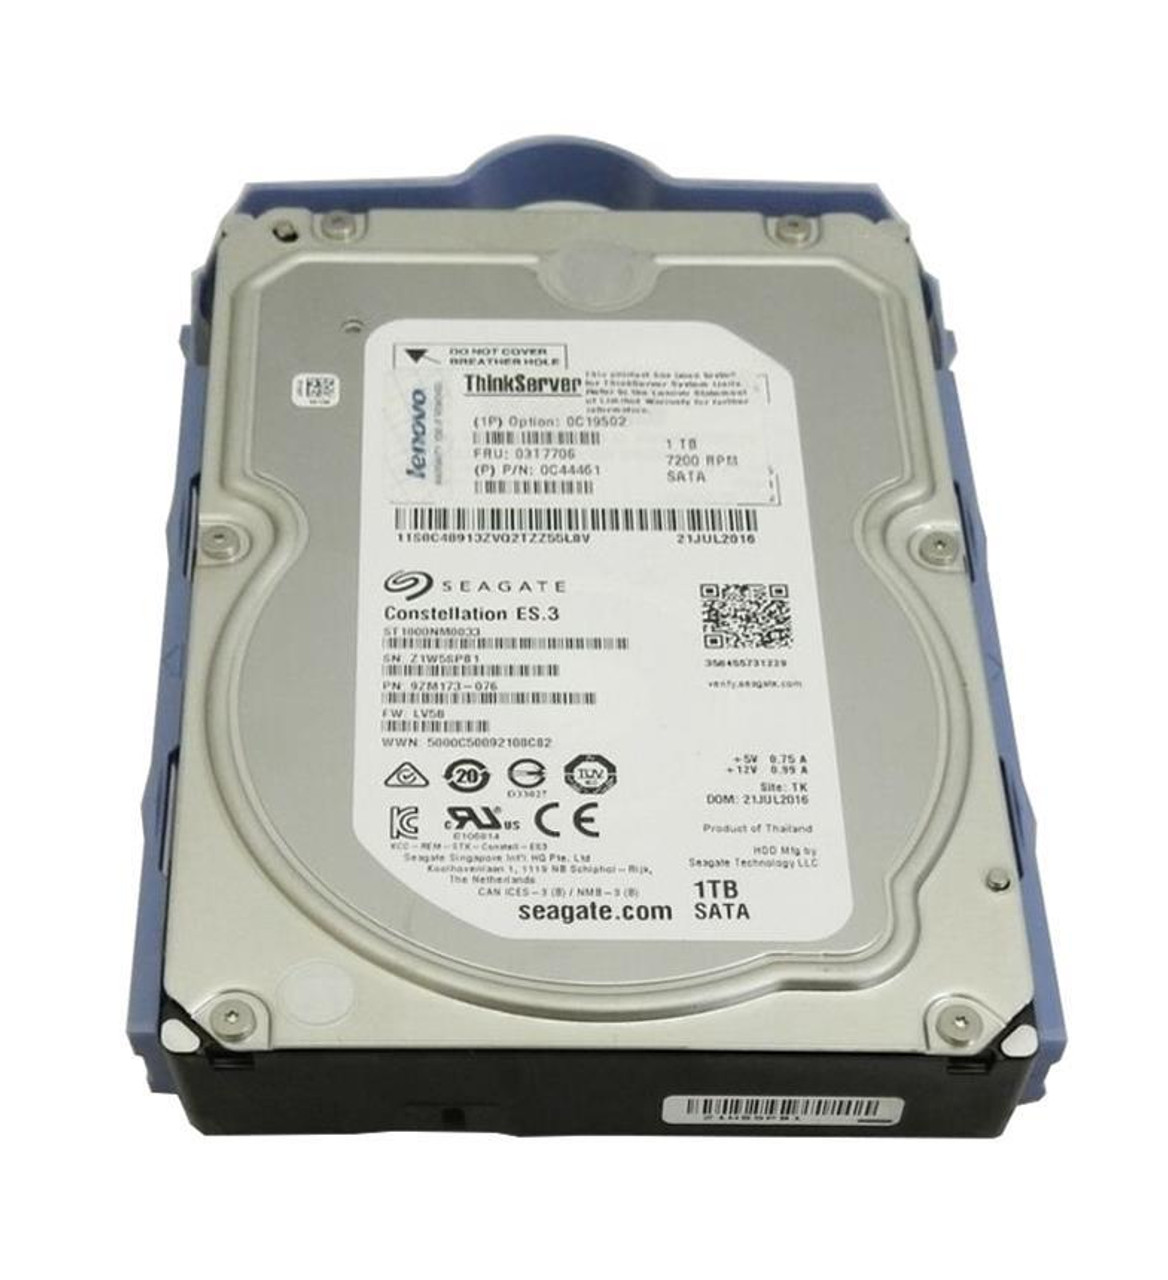 0C19502-02-CT Lenovo 1TB 7200RPM SATA 6Gbps Hot Swap 64MB Cache 3.5-inch Internal Hard Drive for ThinkServer TS140 and TS440